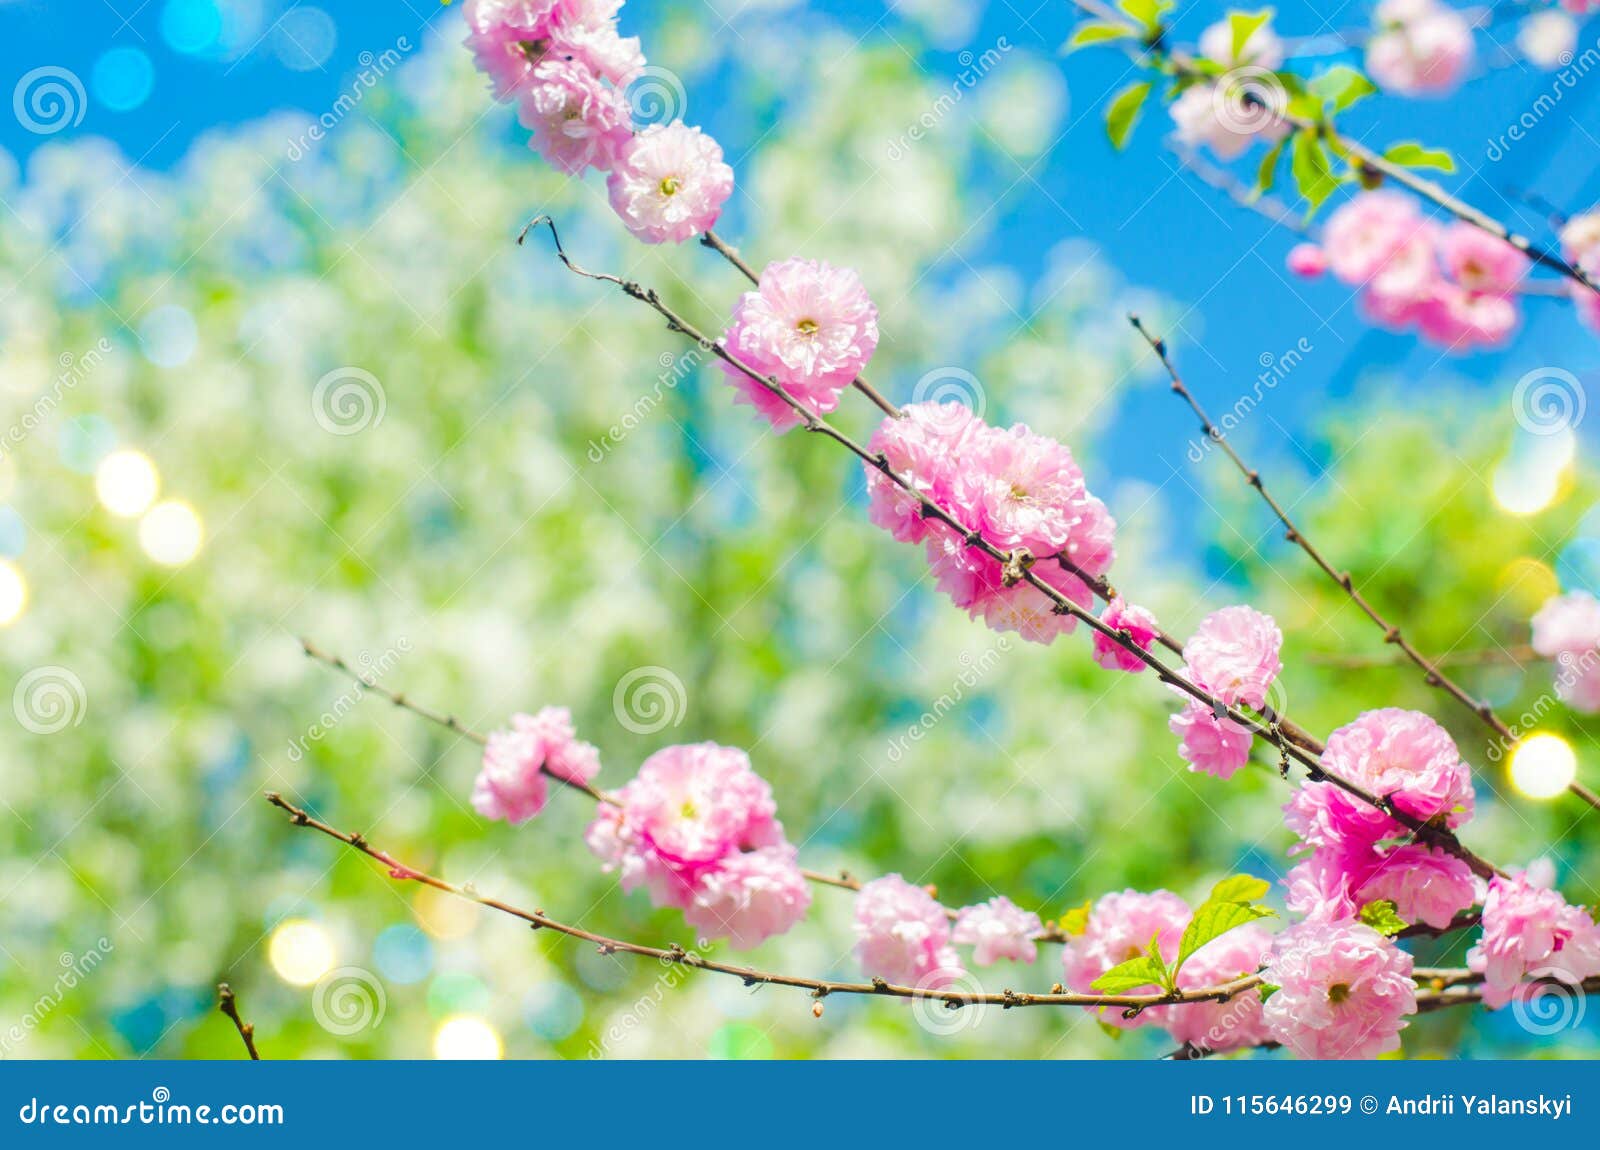 Pink Bush Blossoms in Spring with Pink Flowers. Natural Wallpaper. Concept  of Spring Stock Image - Image of flower, pink: 115646299